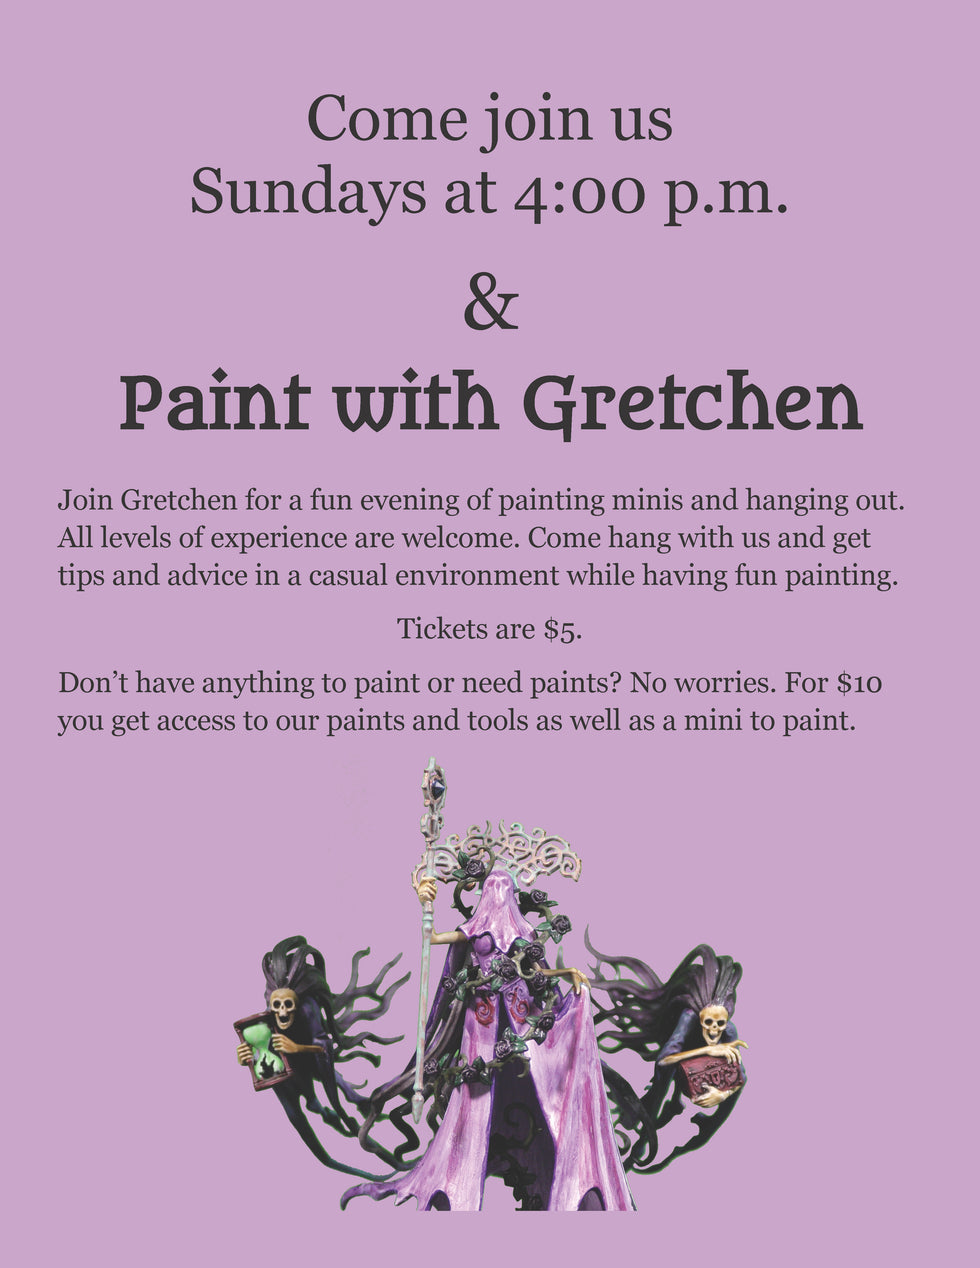 Come and Paint with Gretchen